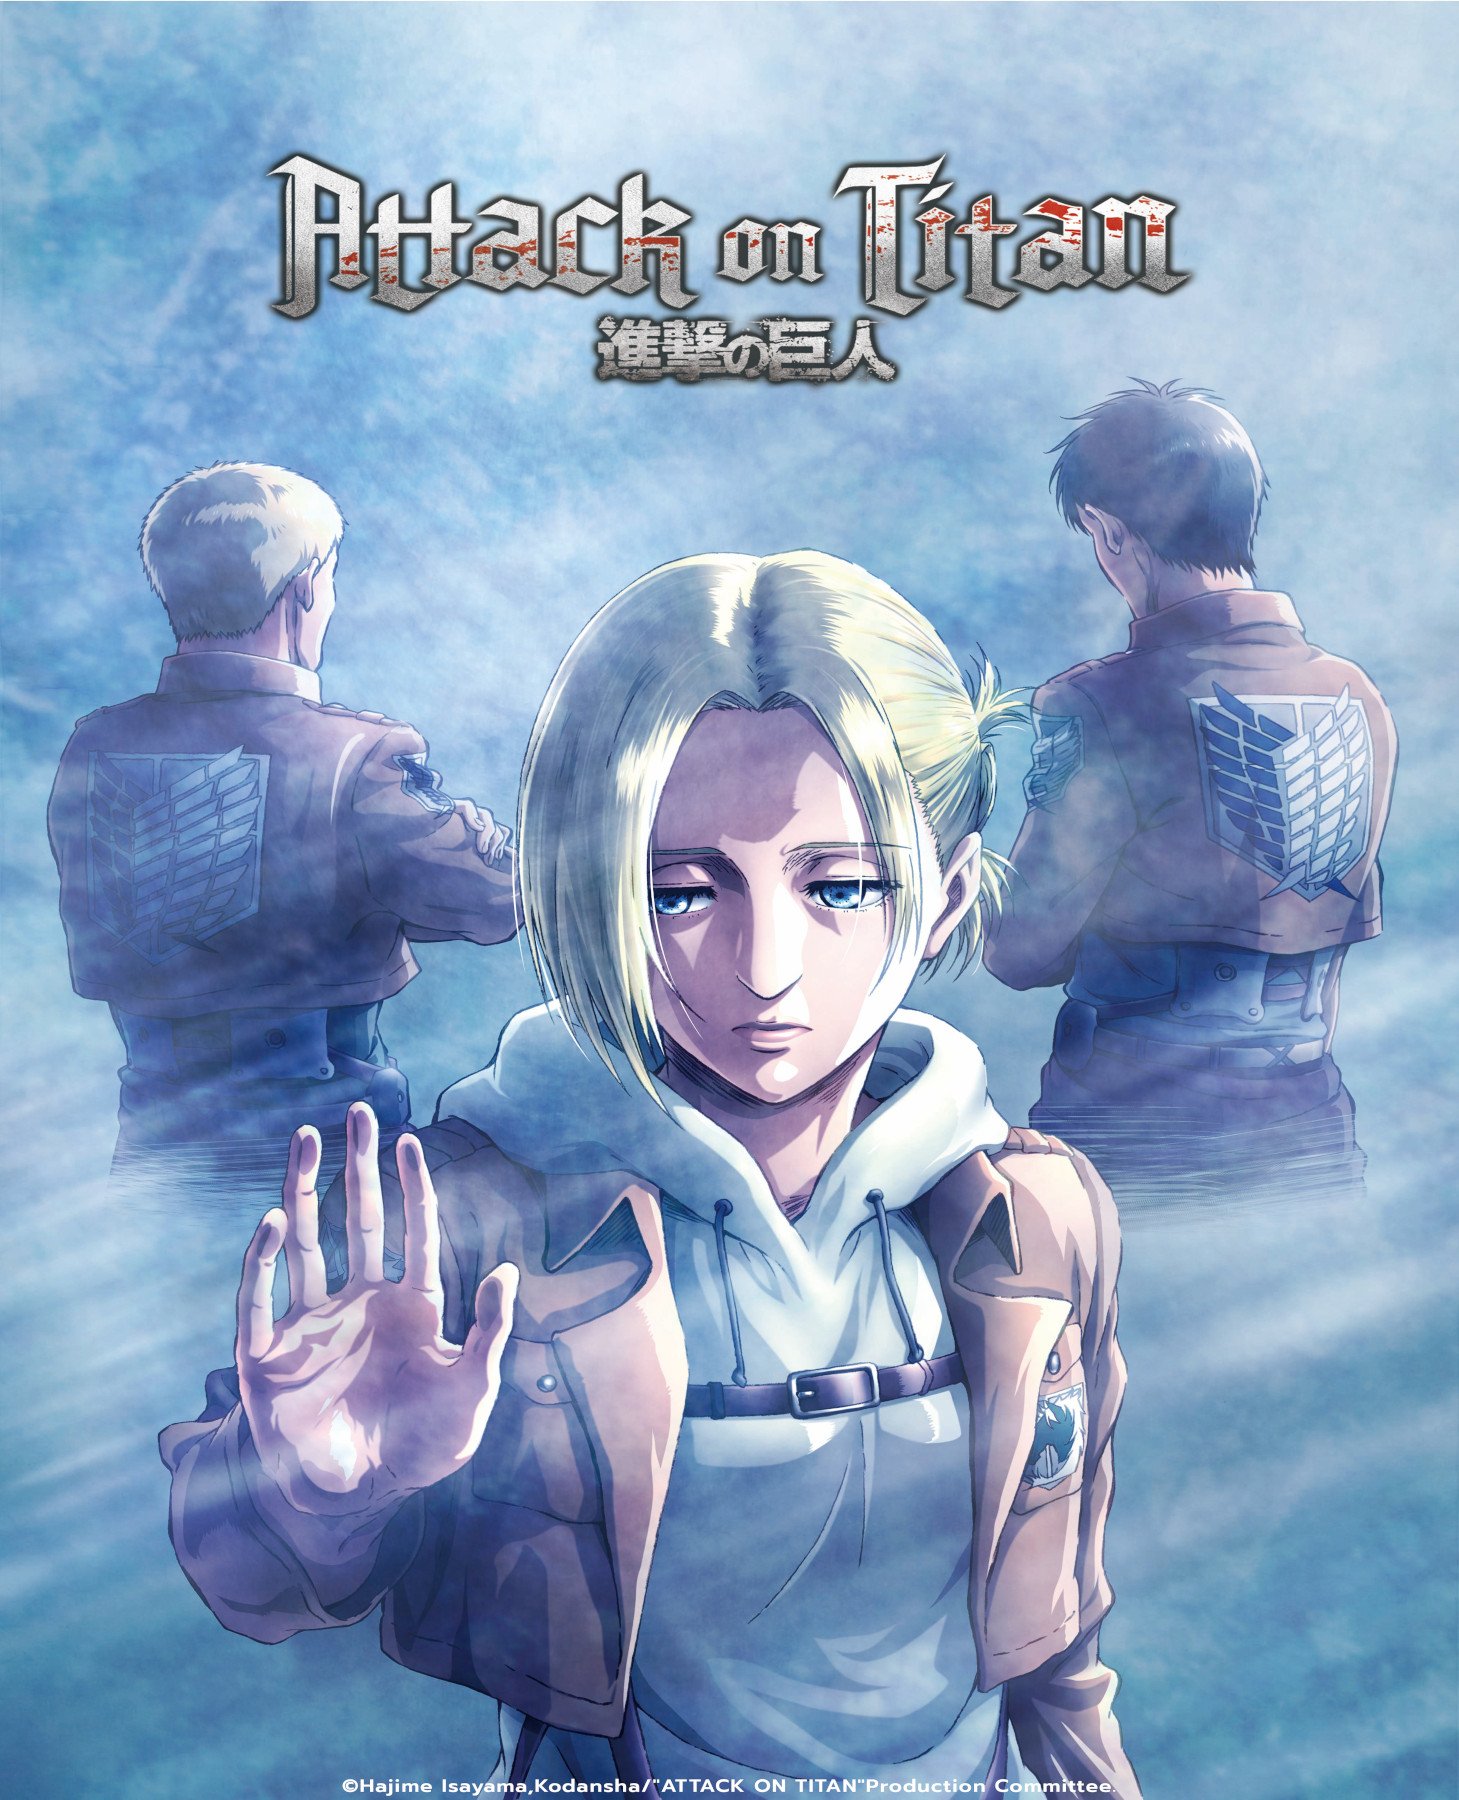 Annie Leonhart in key art for 'Attack on Titan's 'Lost Girls' OVA. She's holding her hand out and frowning.